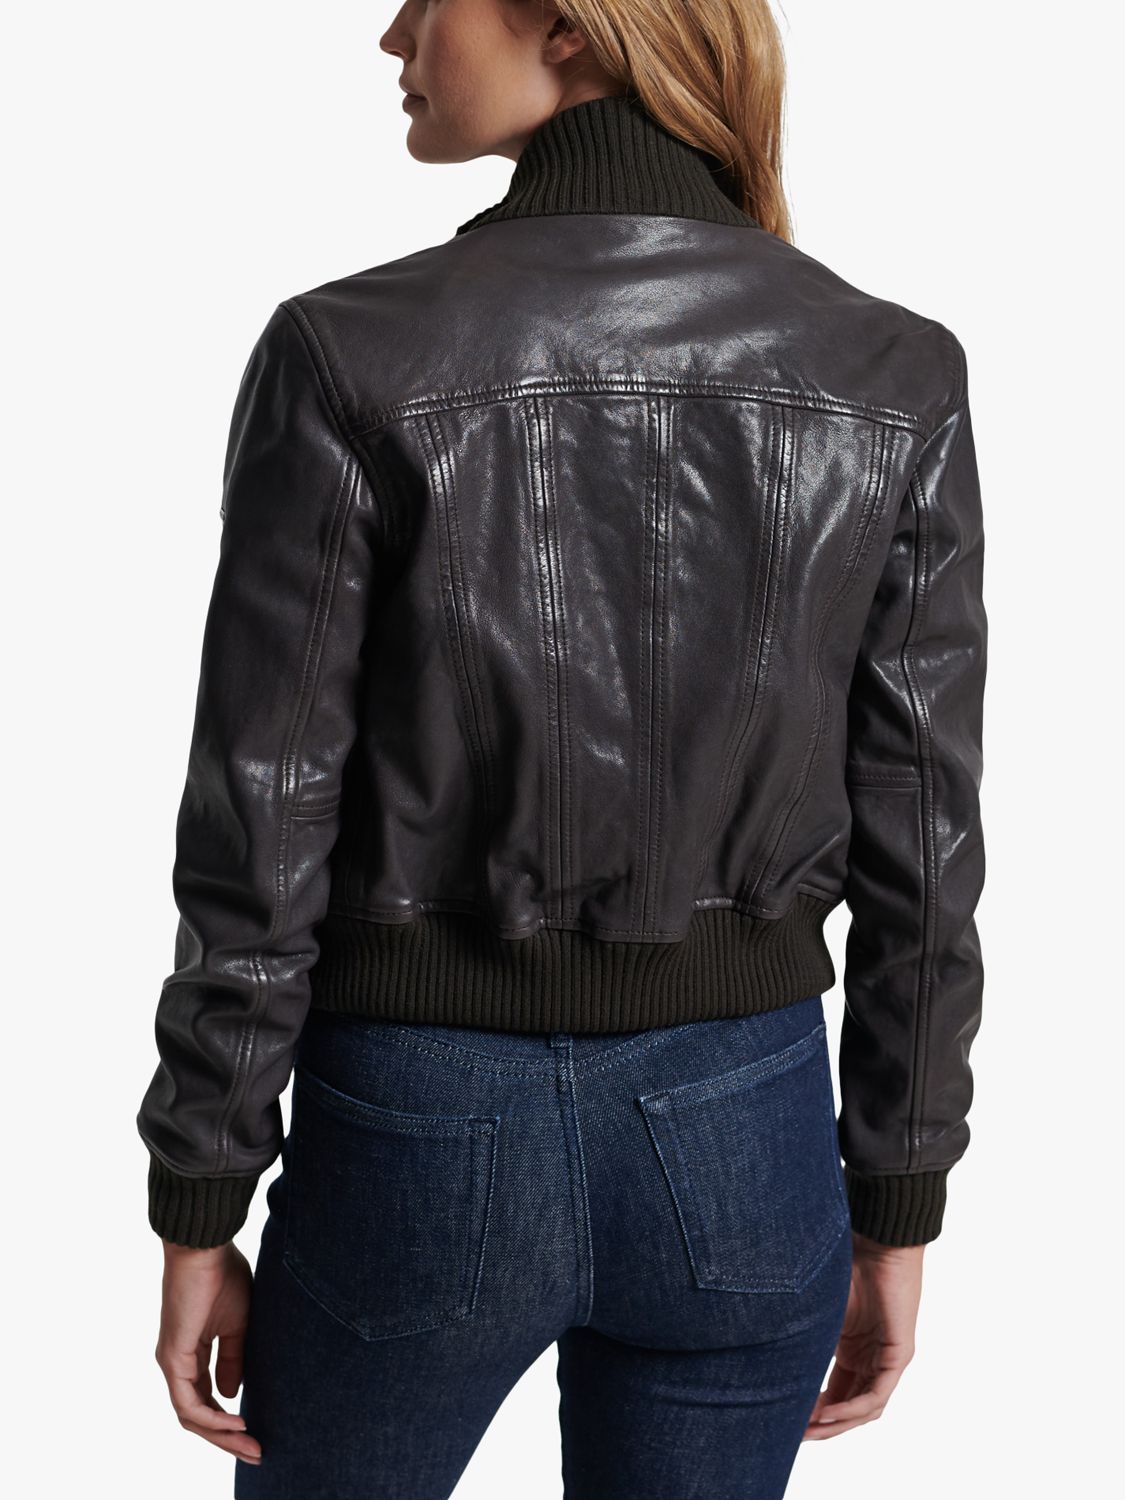 Superdry Knitted Collar Leather Bomber Jacket, Chocolate at John Lewis ...